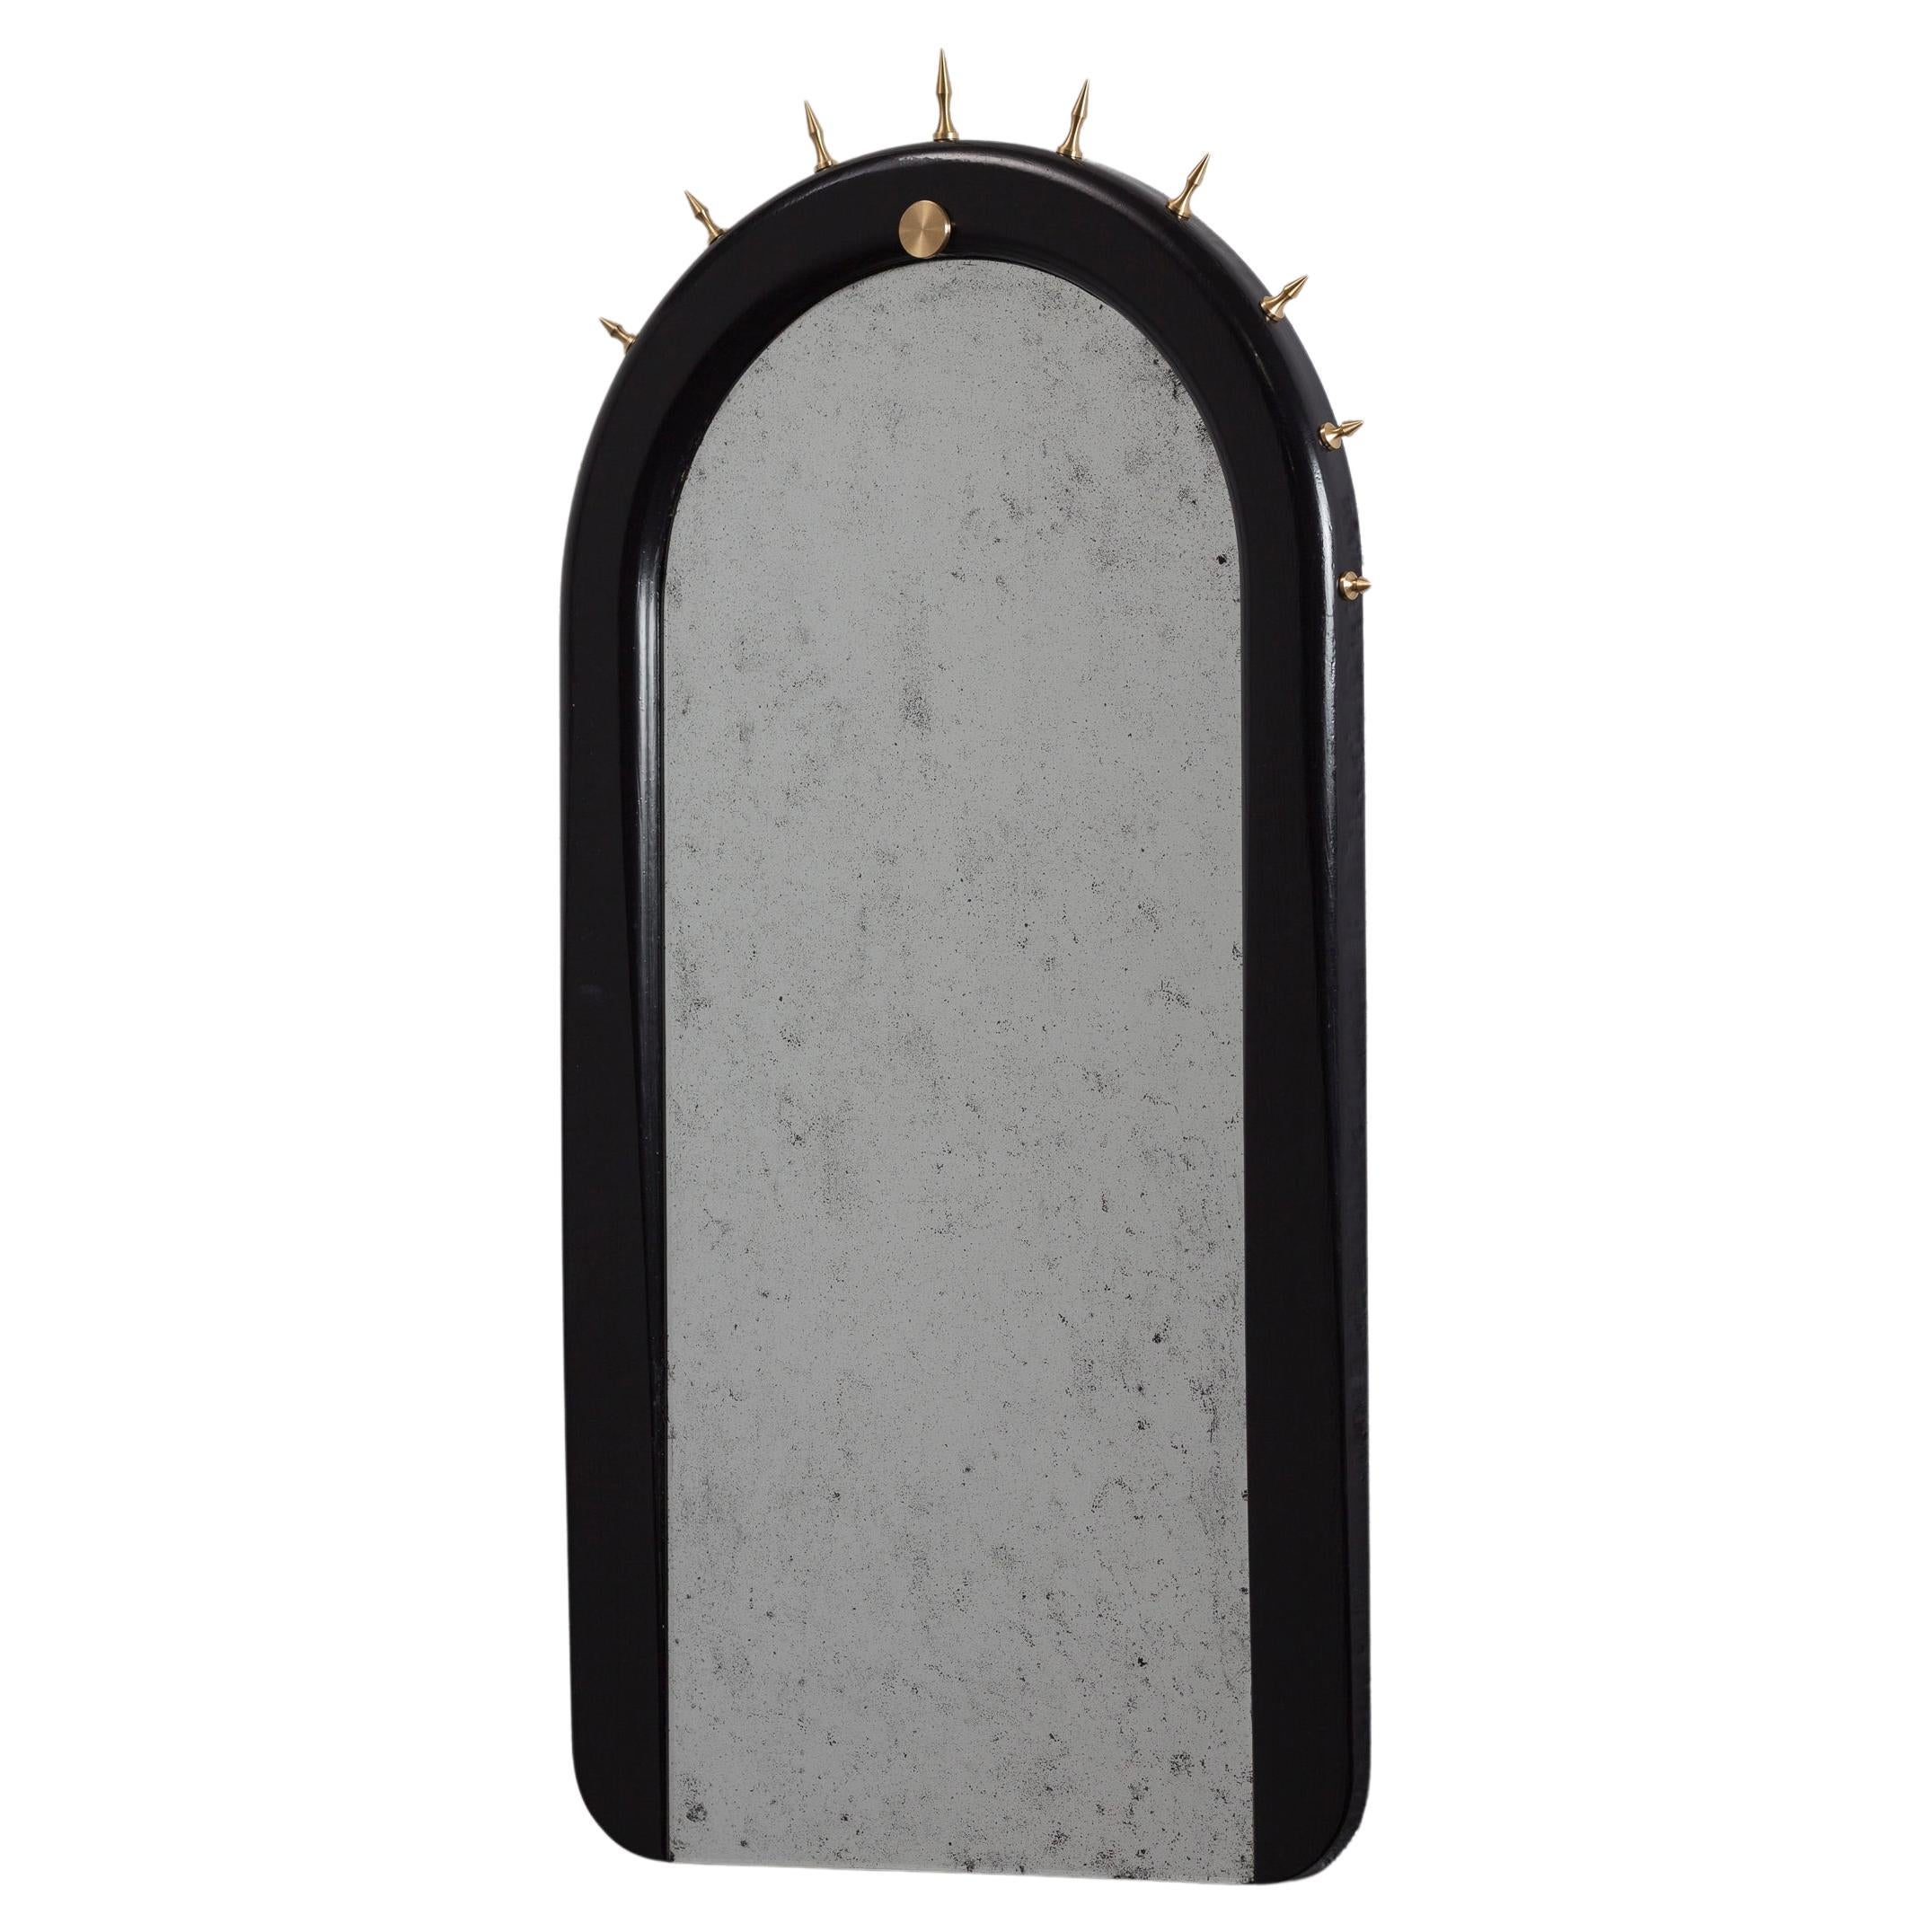 Sitiera_01 Wall Mirror in Solid Wood by ANDEAN, Represented by Tuleste Factory